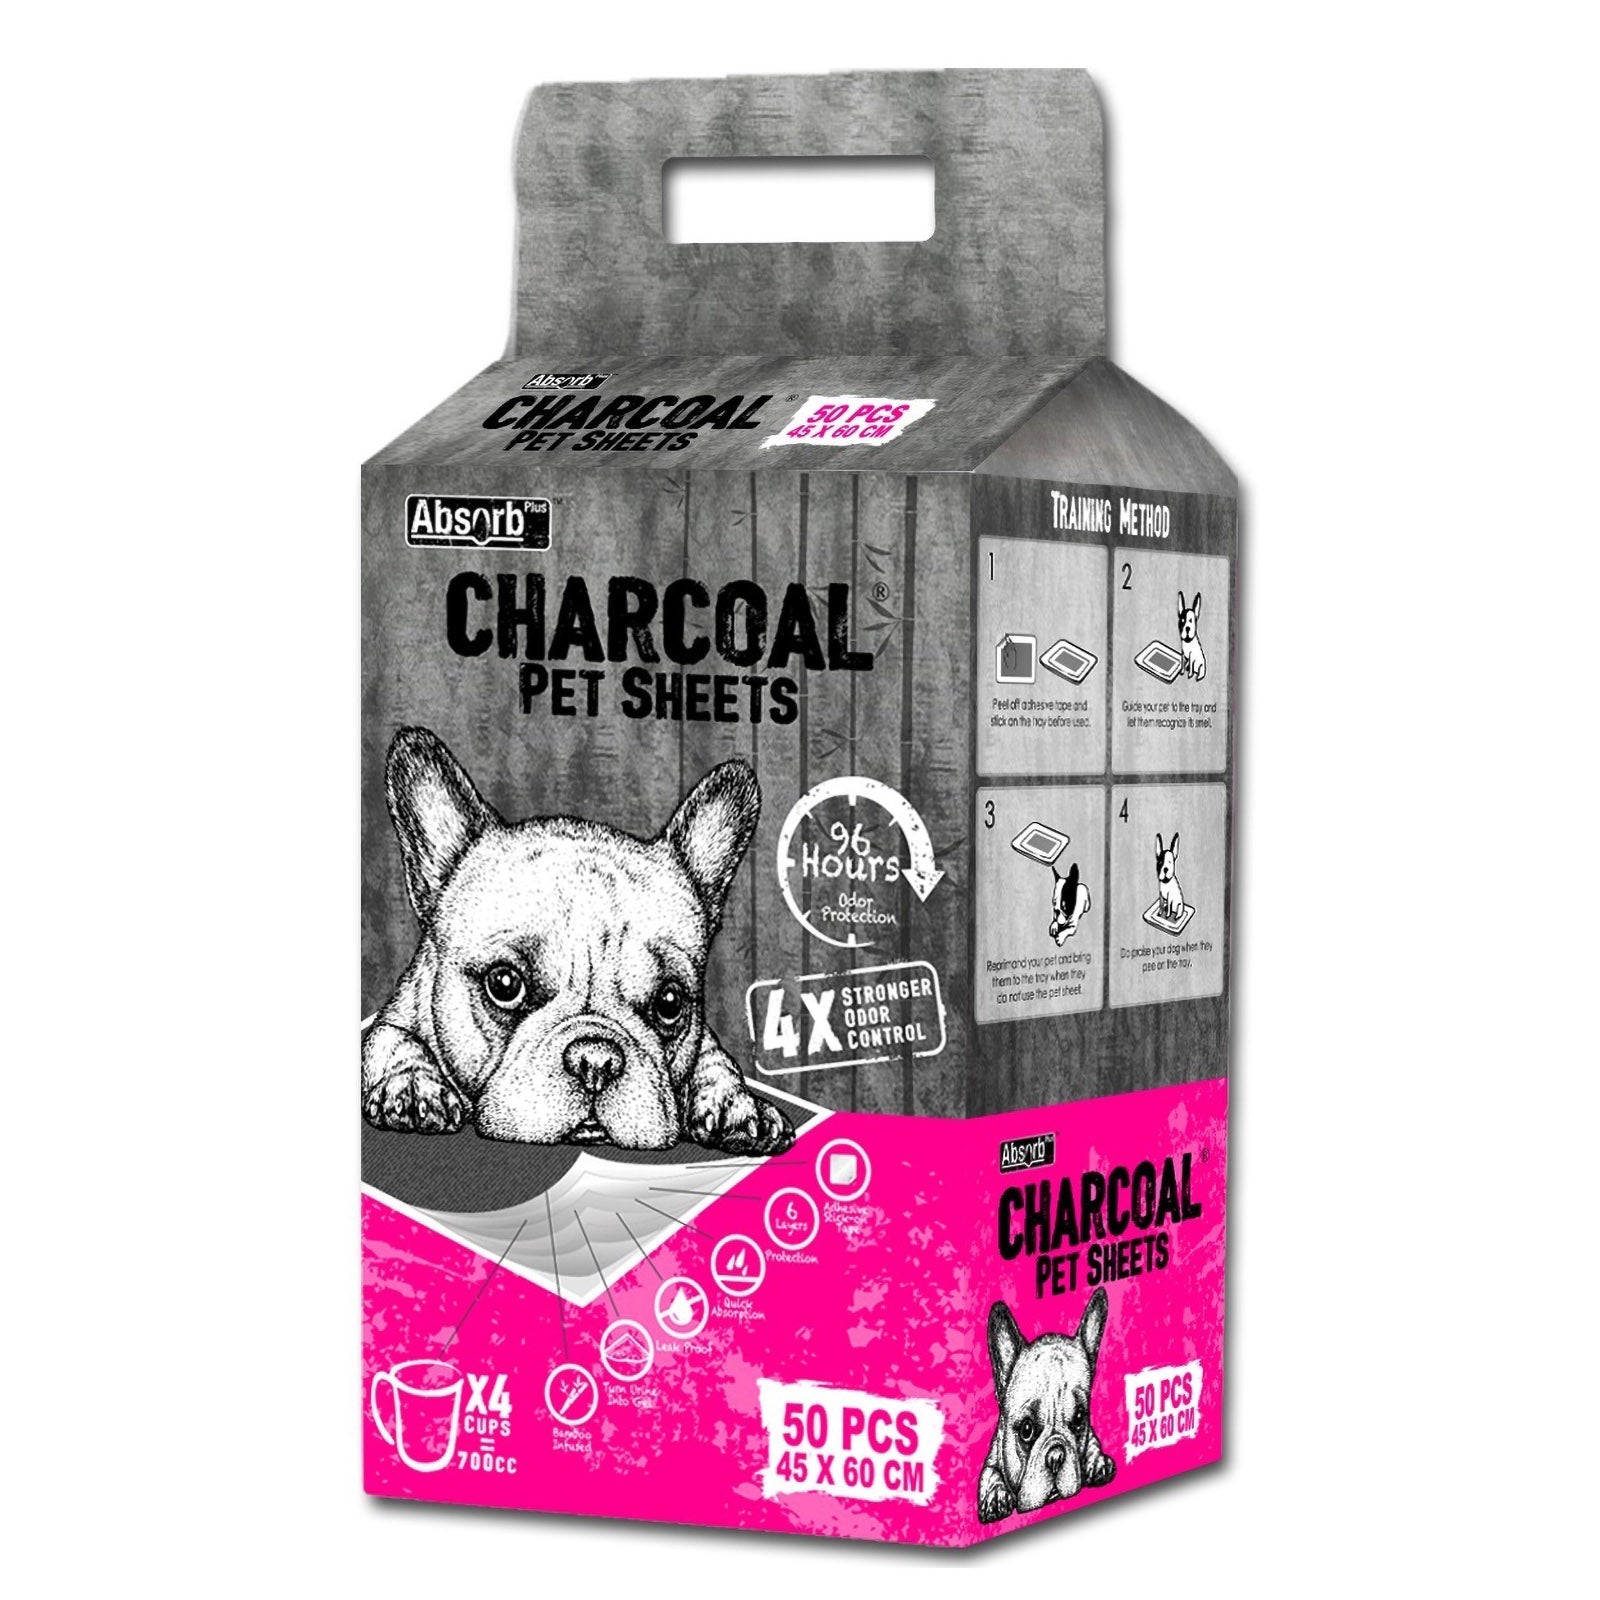 Absorb Plus Charcoal Pet Sheets